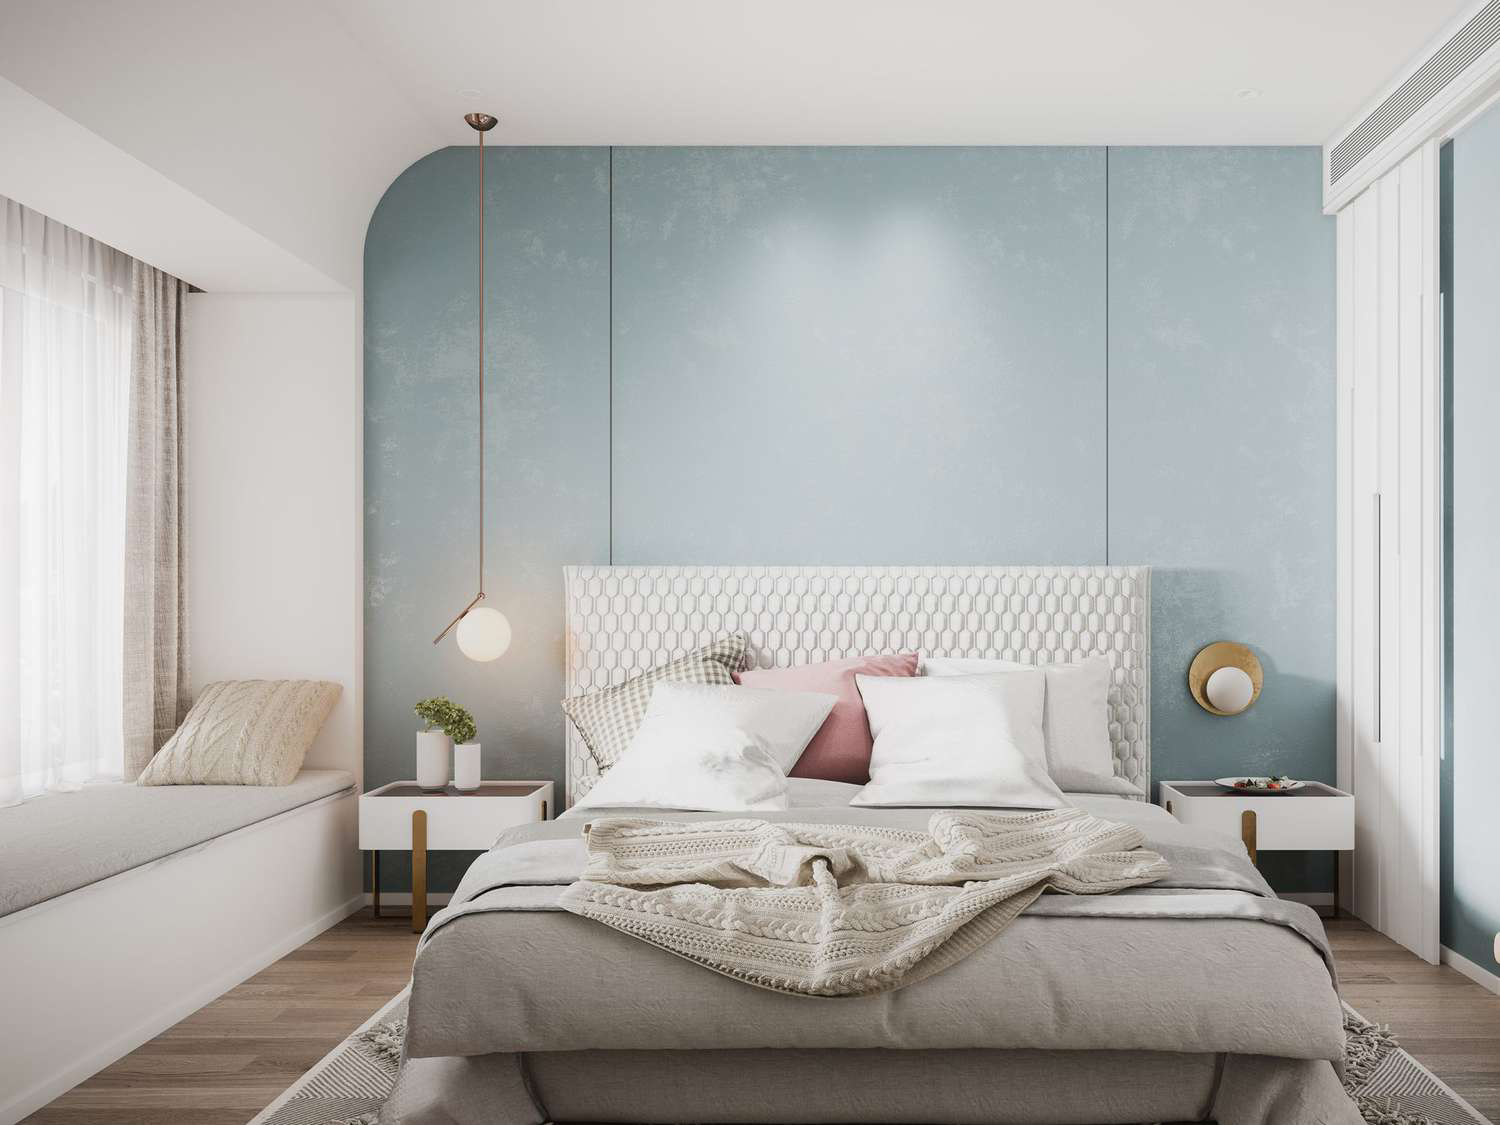 Bedroom wall Painting